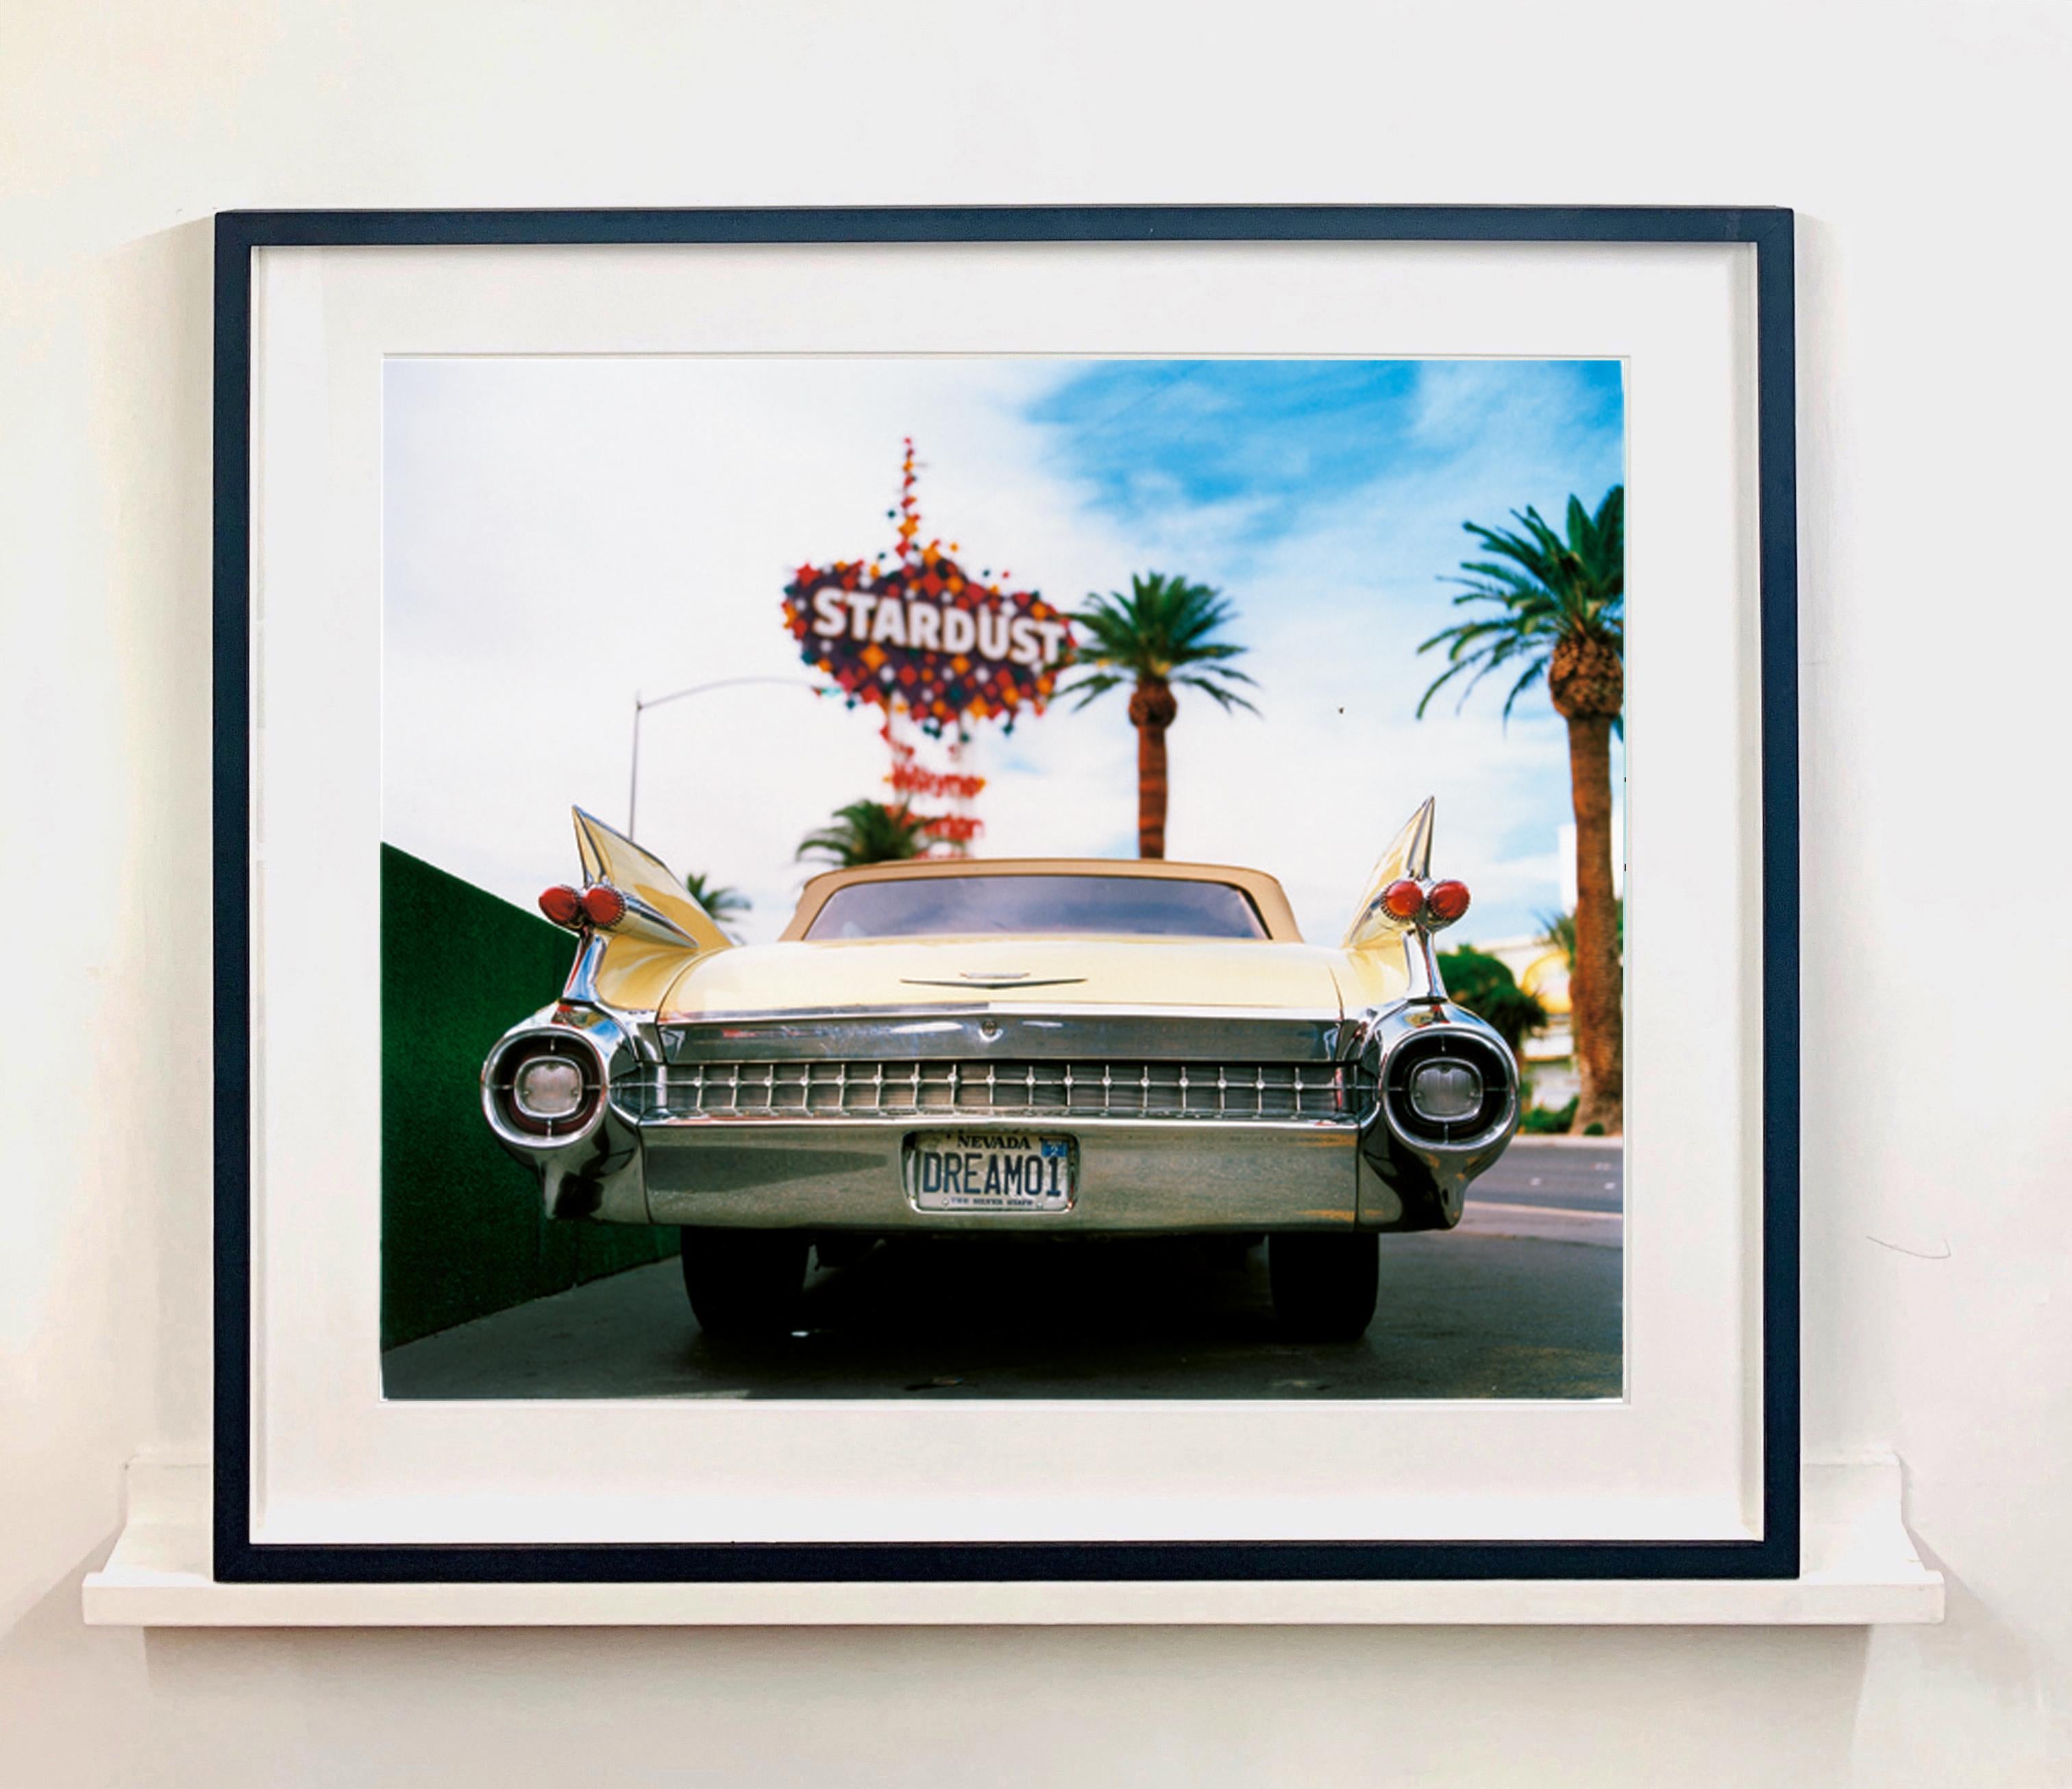 Stardust Dreams, from Richard Heeps Dream in Colour series. This cool picture has a classic Americana feel. Richard's pictures beautifully capture parts of Las Vegas which are no longer there.

This artwork is a limited edition of 25, gloss